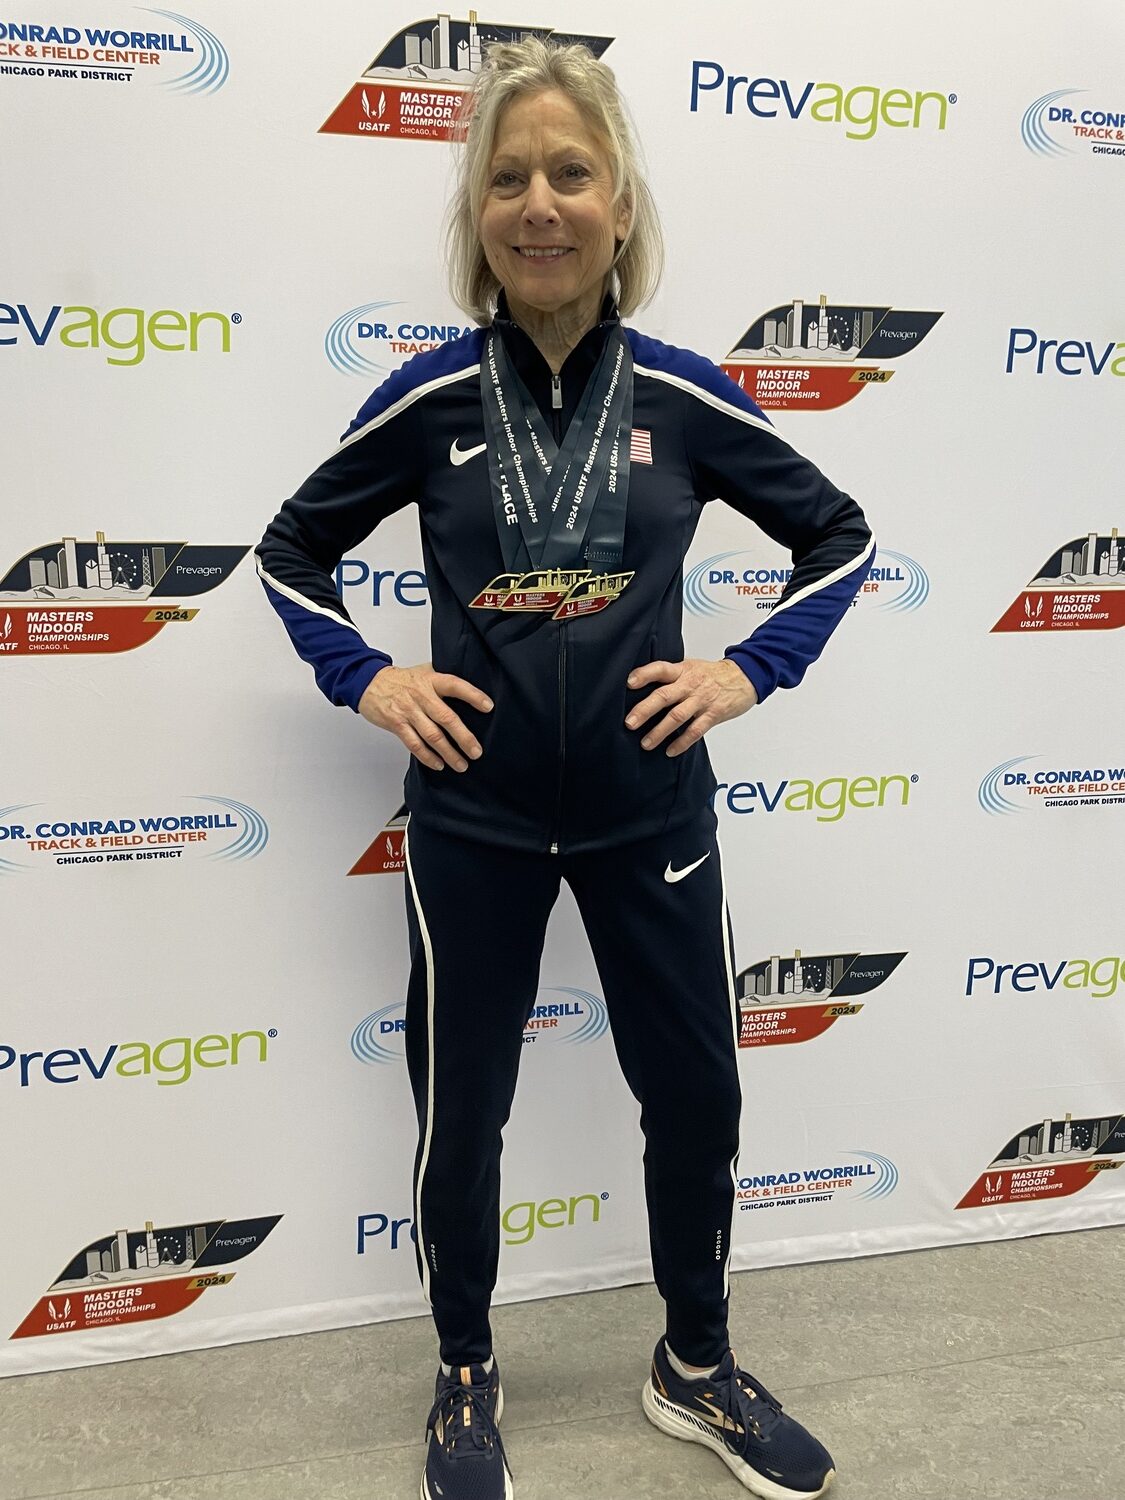 Joy Flynn with her five medals that she won at the USATF Masters Indoor Nationals.   COURTESY DAN FLYNN